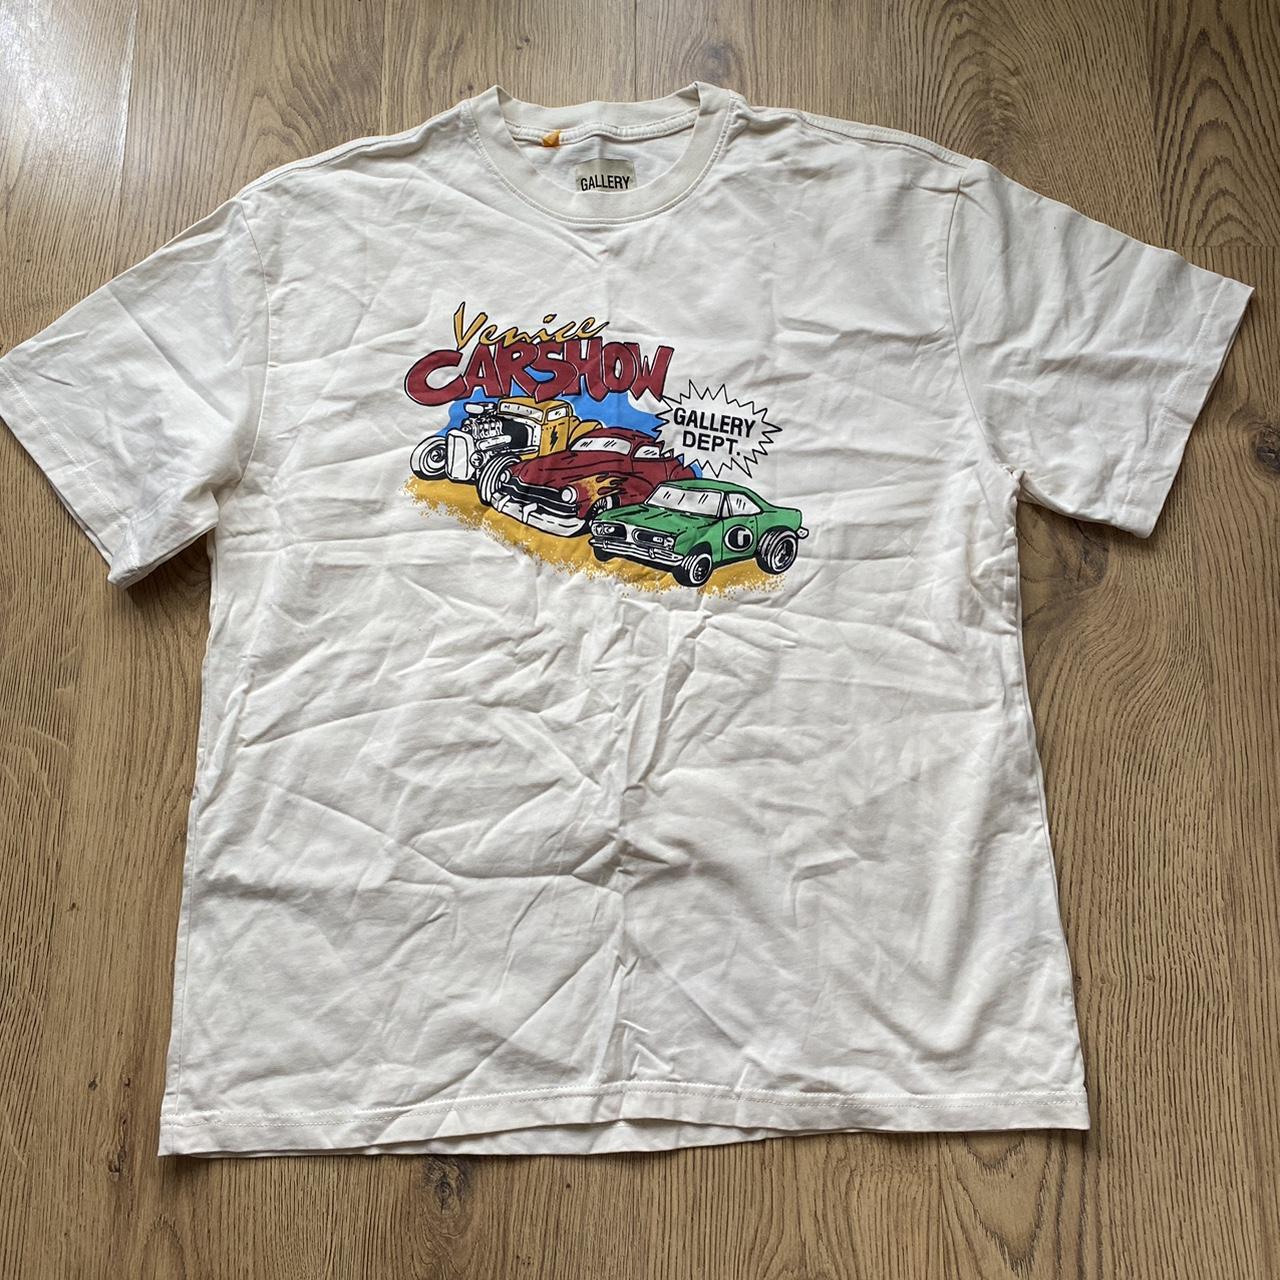 gallery dept venice car show tee worn once perfect... - Depop